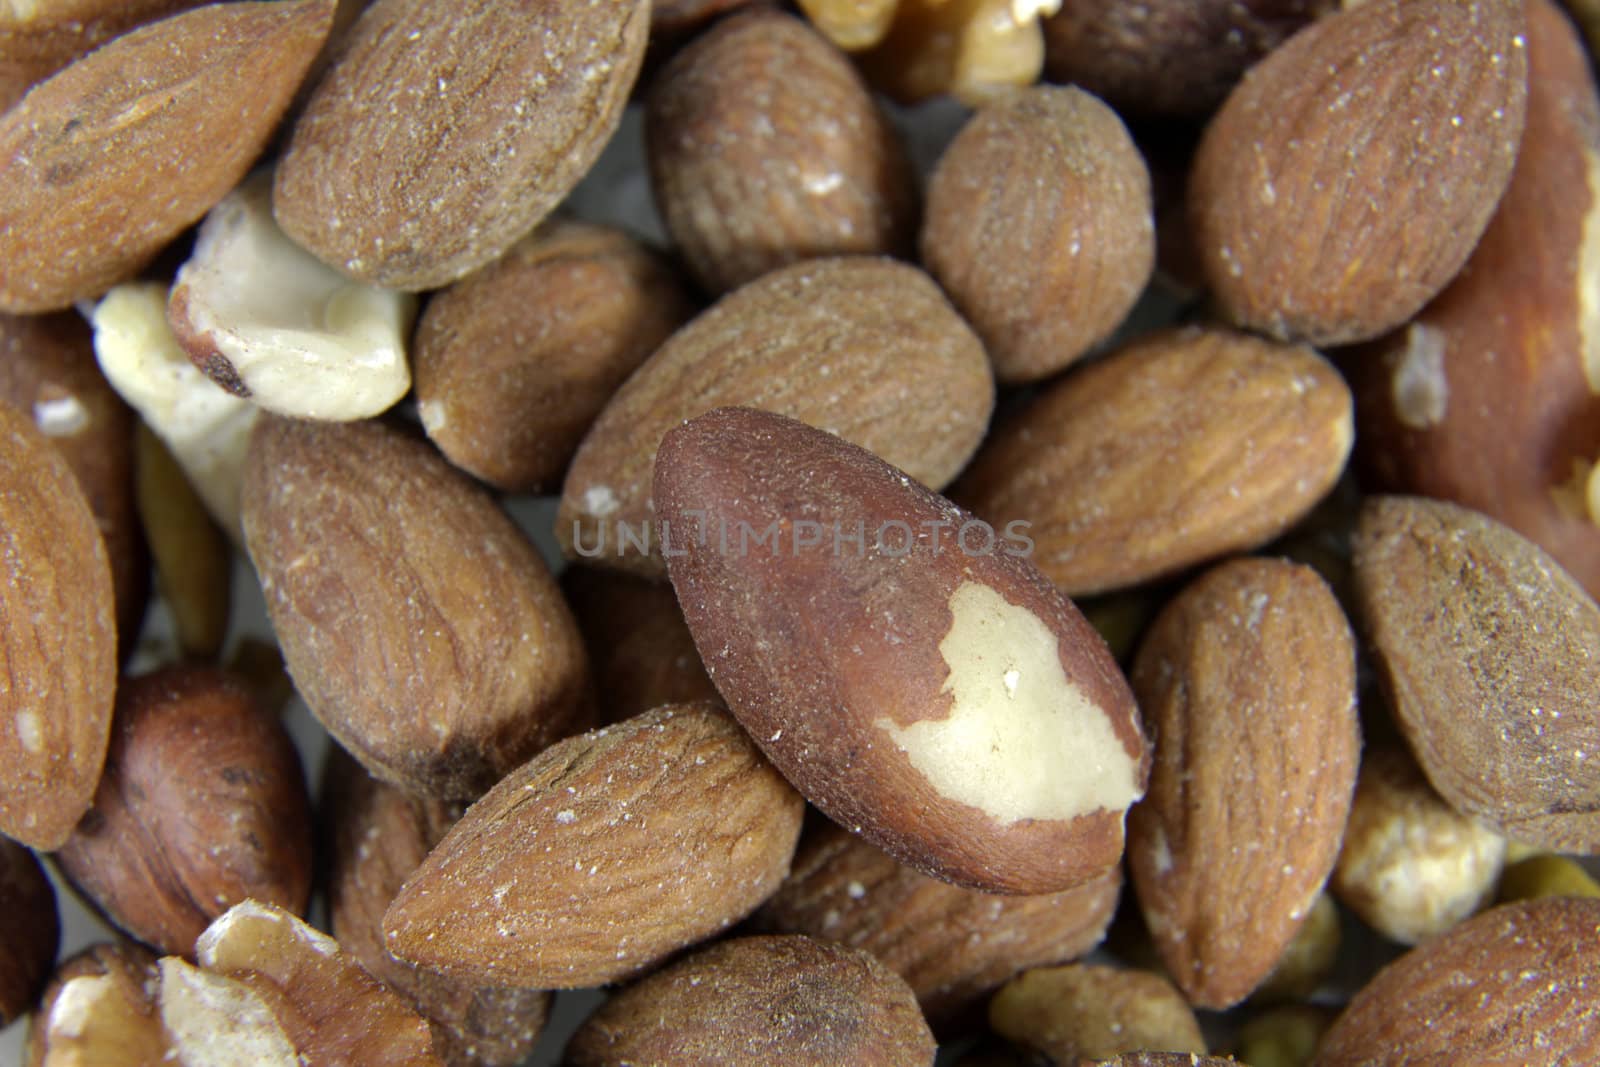 A close-up of mixed nuts, featuring walnuts, almonds, hazelnuts, and brazil nuts.
